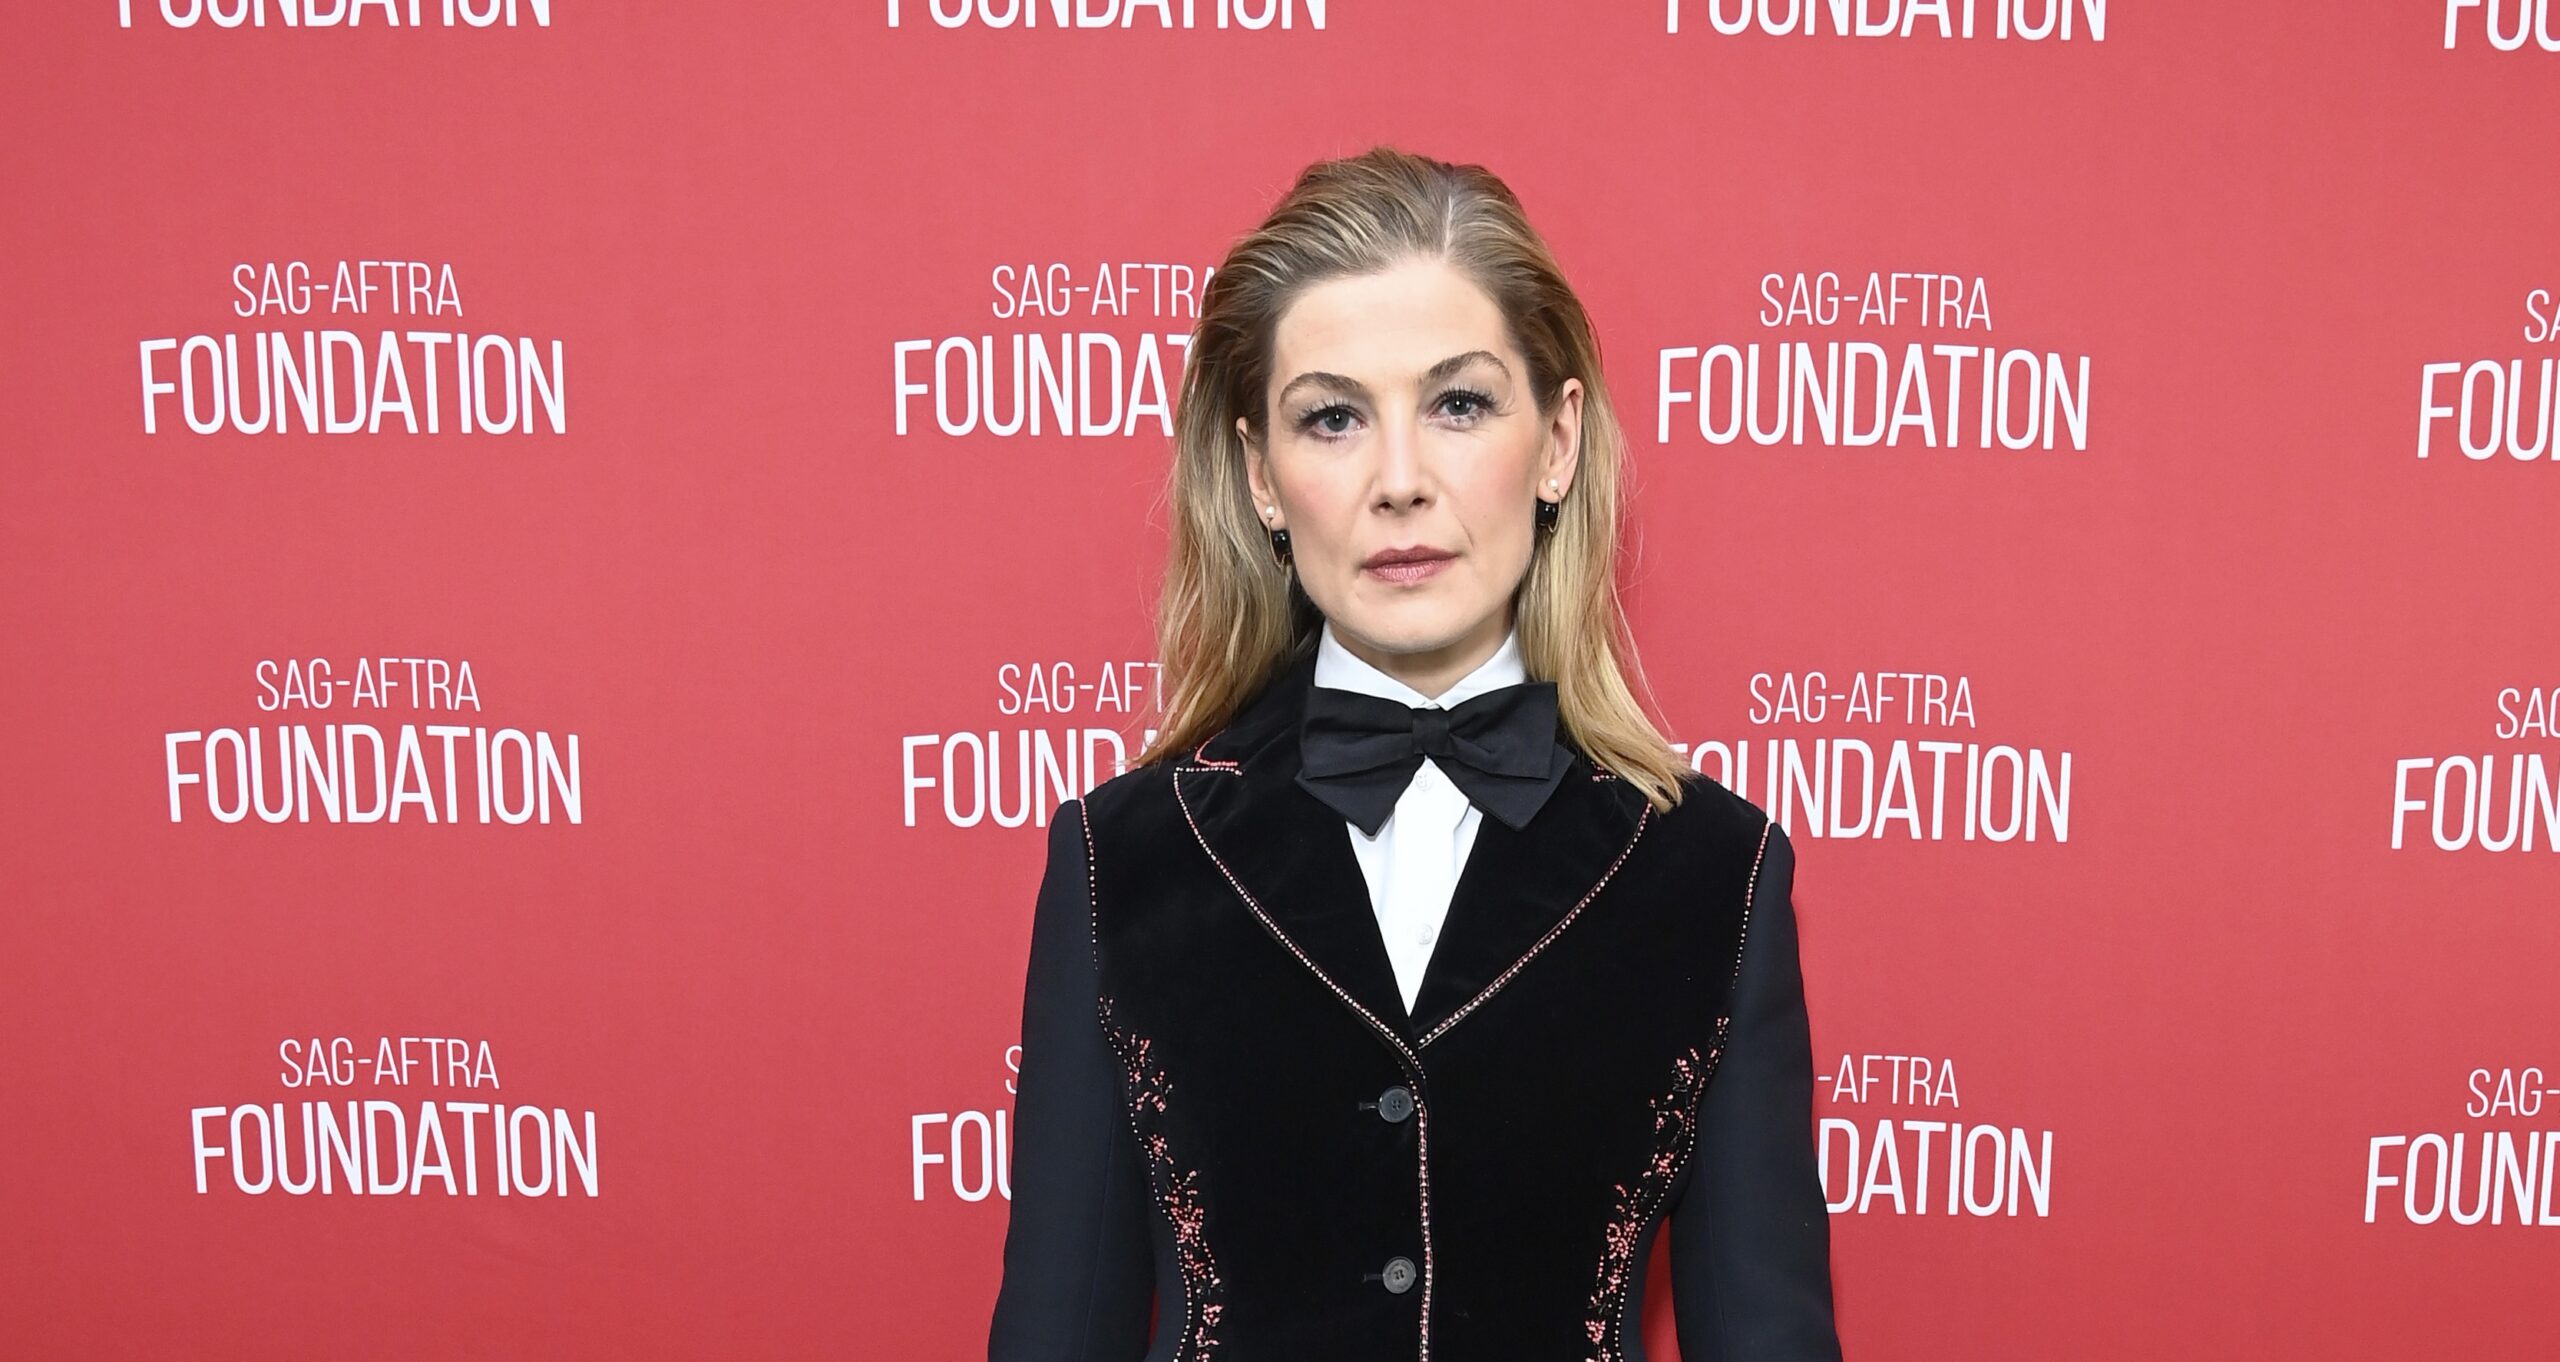 Actress Rosamund Pike at the SAG-AFTRA Foundation event in Los Angeles, wearing a black velvet dress with pink embroidery, a white high-collar shirt, and a black bow tie.